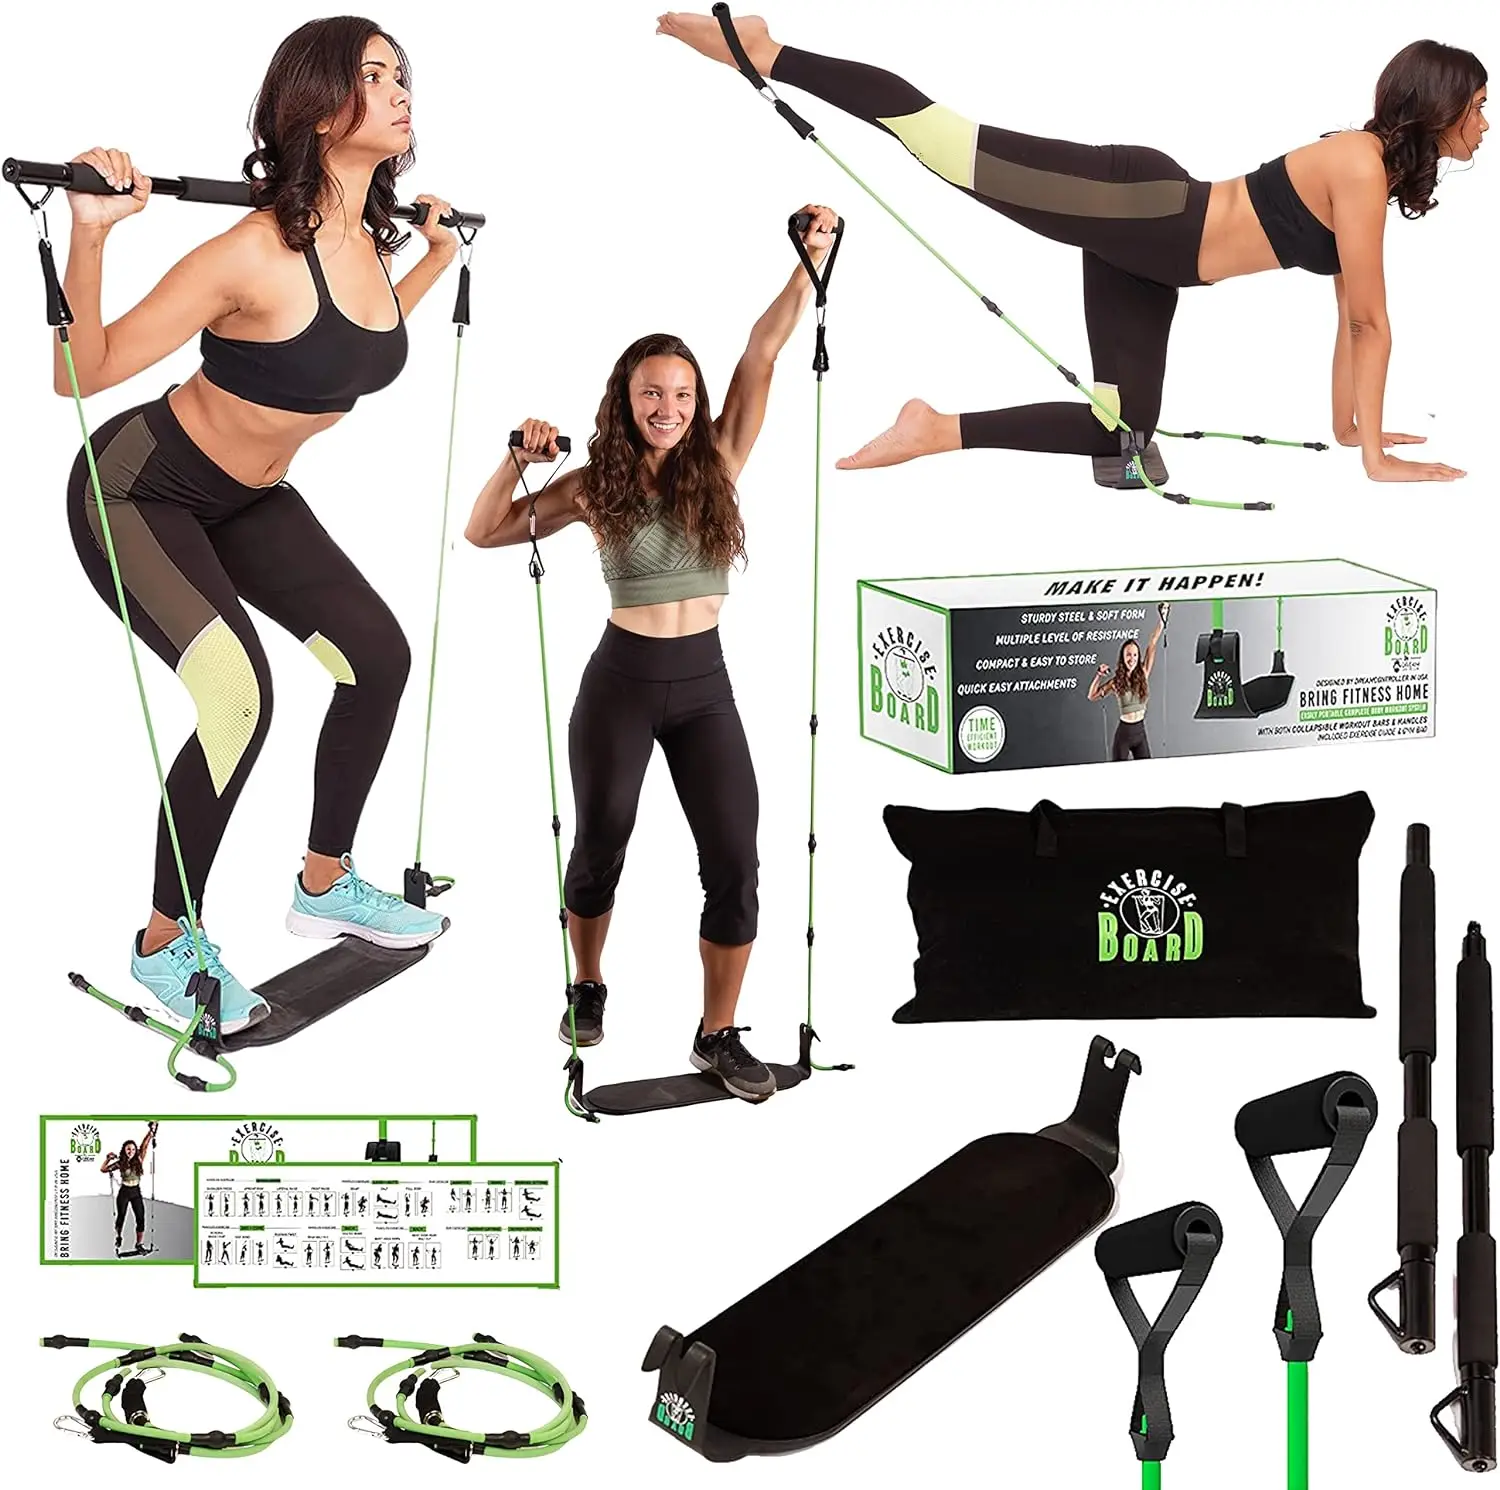 

Workout Equipment for Women. Home Gym Equipment. Home Exercise Equipment Women. Portable Workout Home. Total Body Workout. Trave